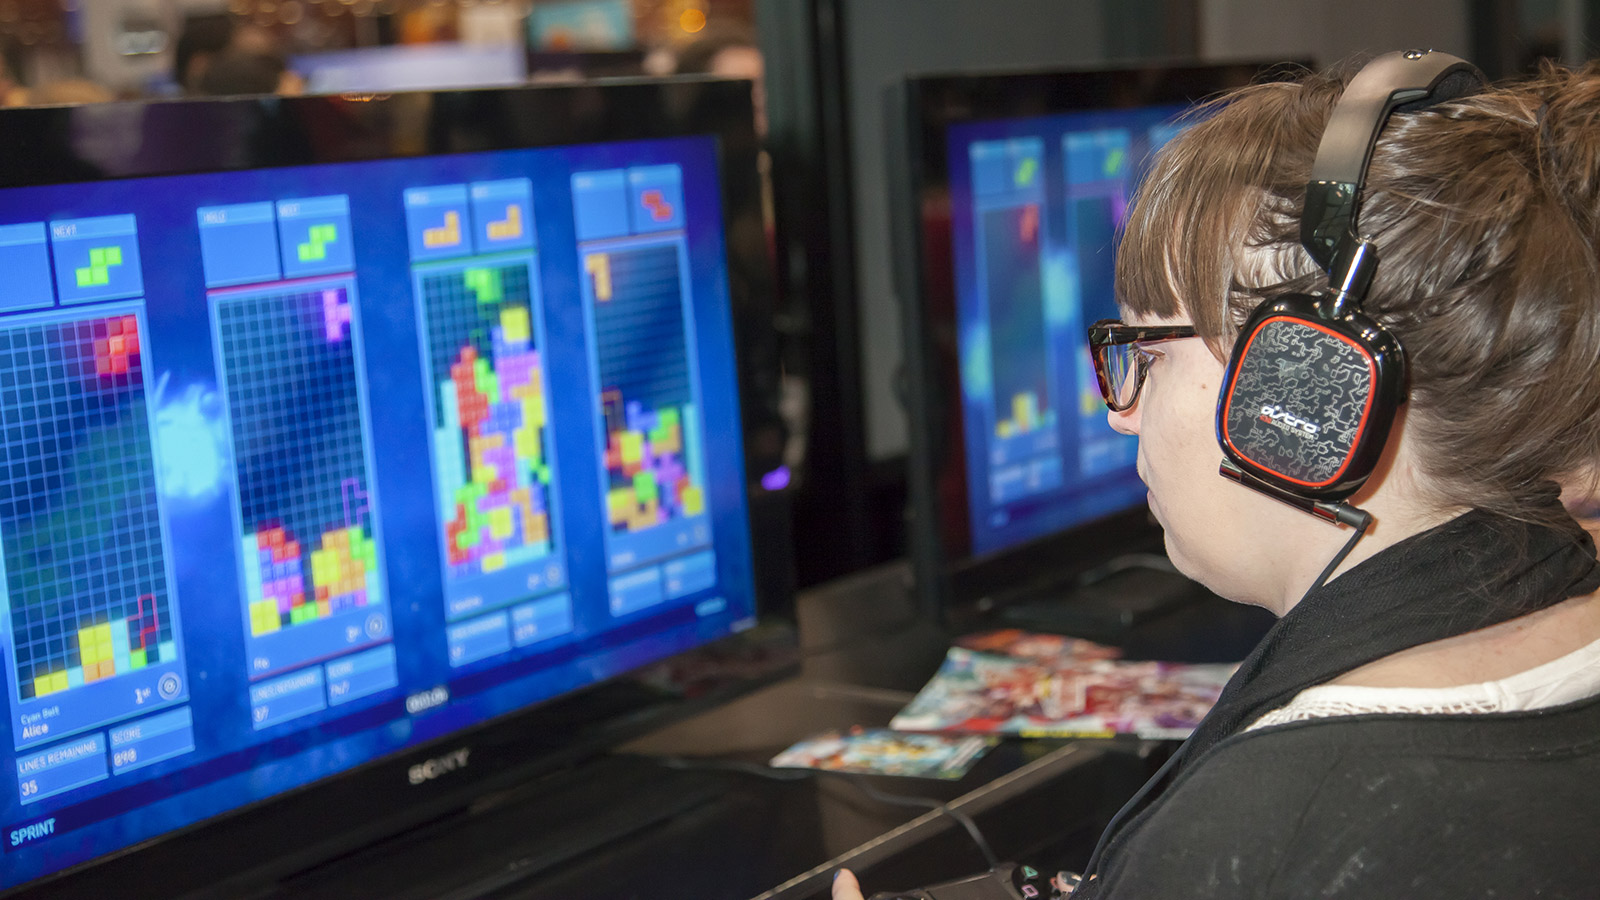 Comic Con attendee plays Tetris Ultimate during Comic Con 2014 at The Jacob K. Javits Convention Center in New York City